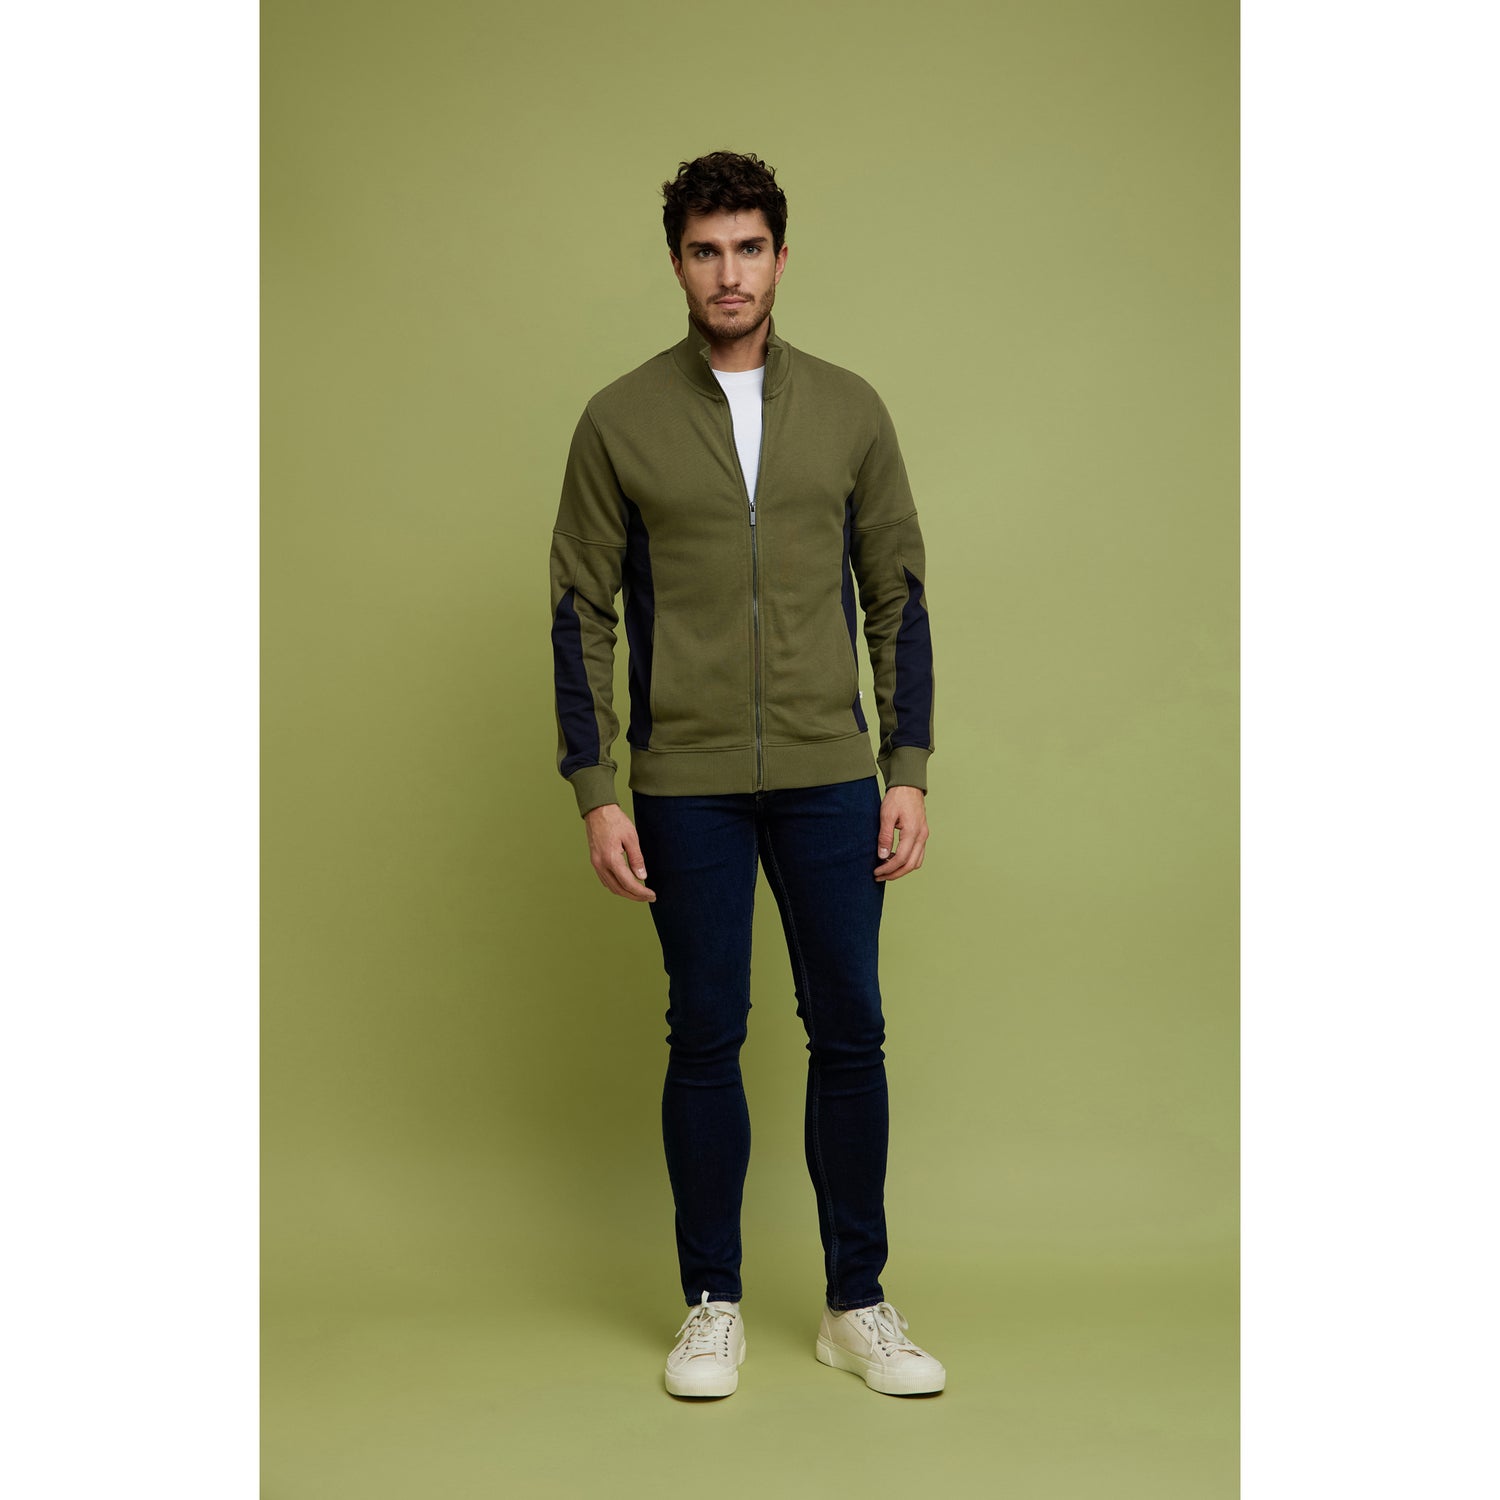 Olive Green and Black Colourblocked Cotton Sweatshirt (VEDUAL)